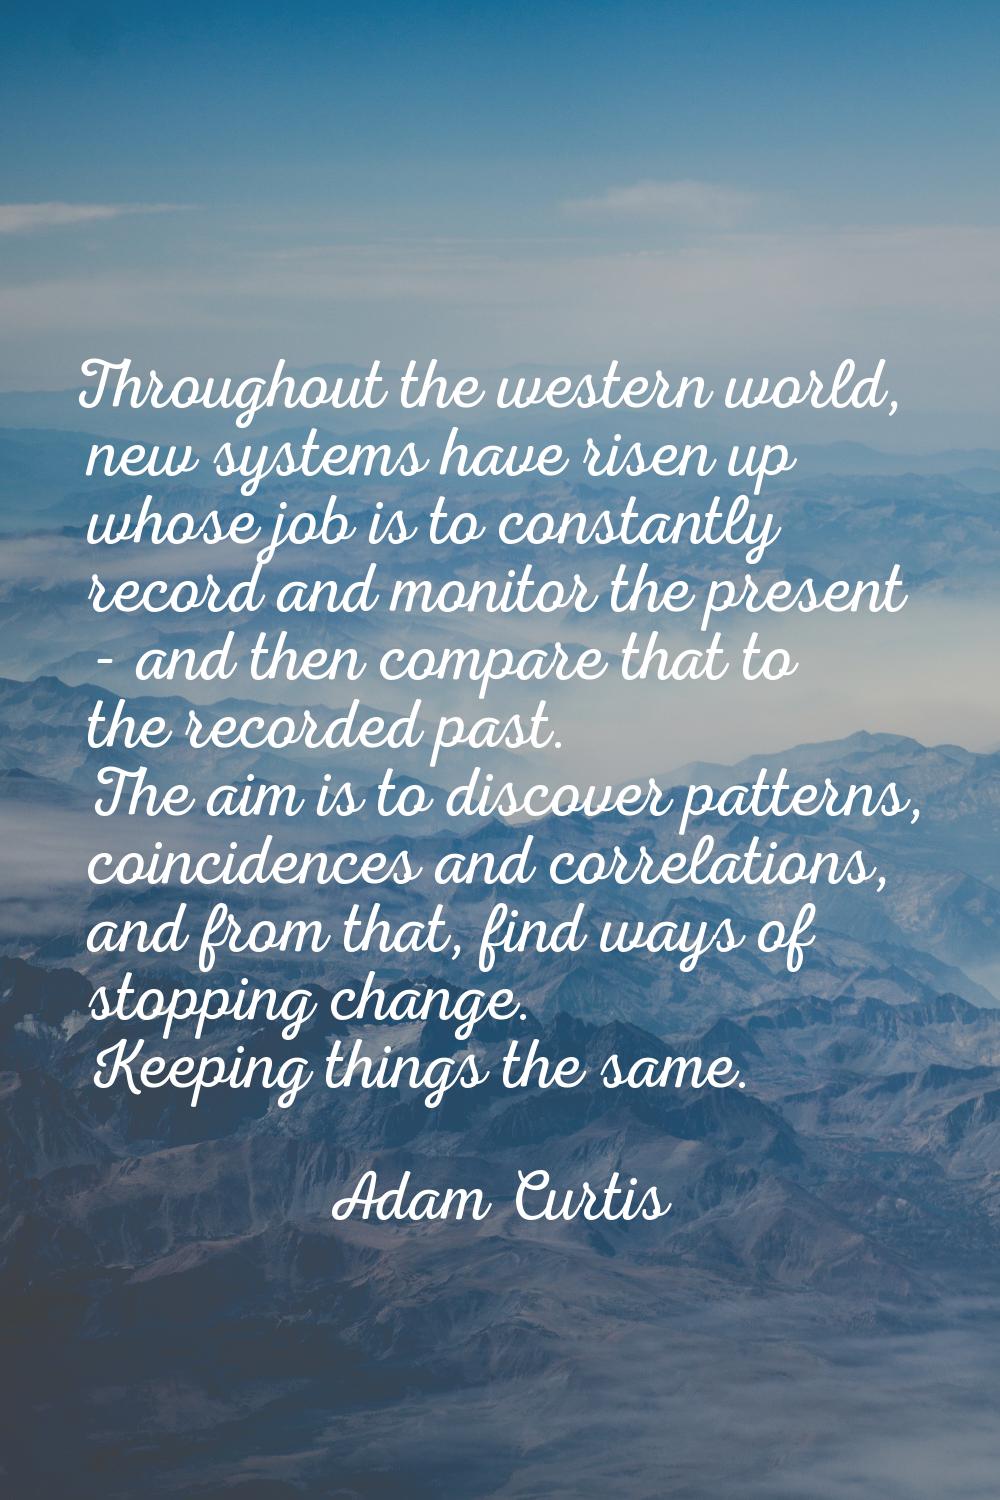 Throughout the western world, new systems have risen up whose job is to constantly record and monit